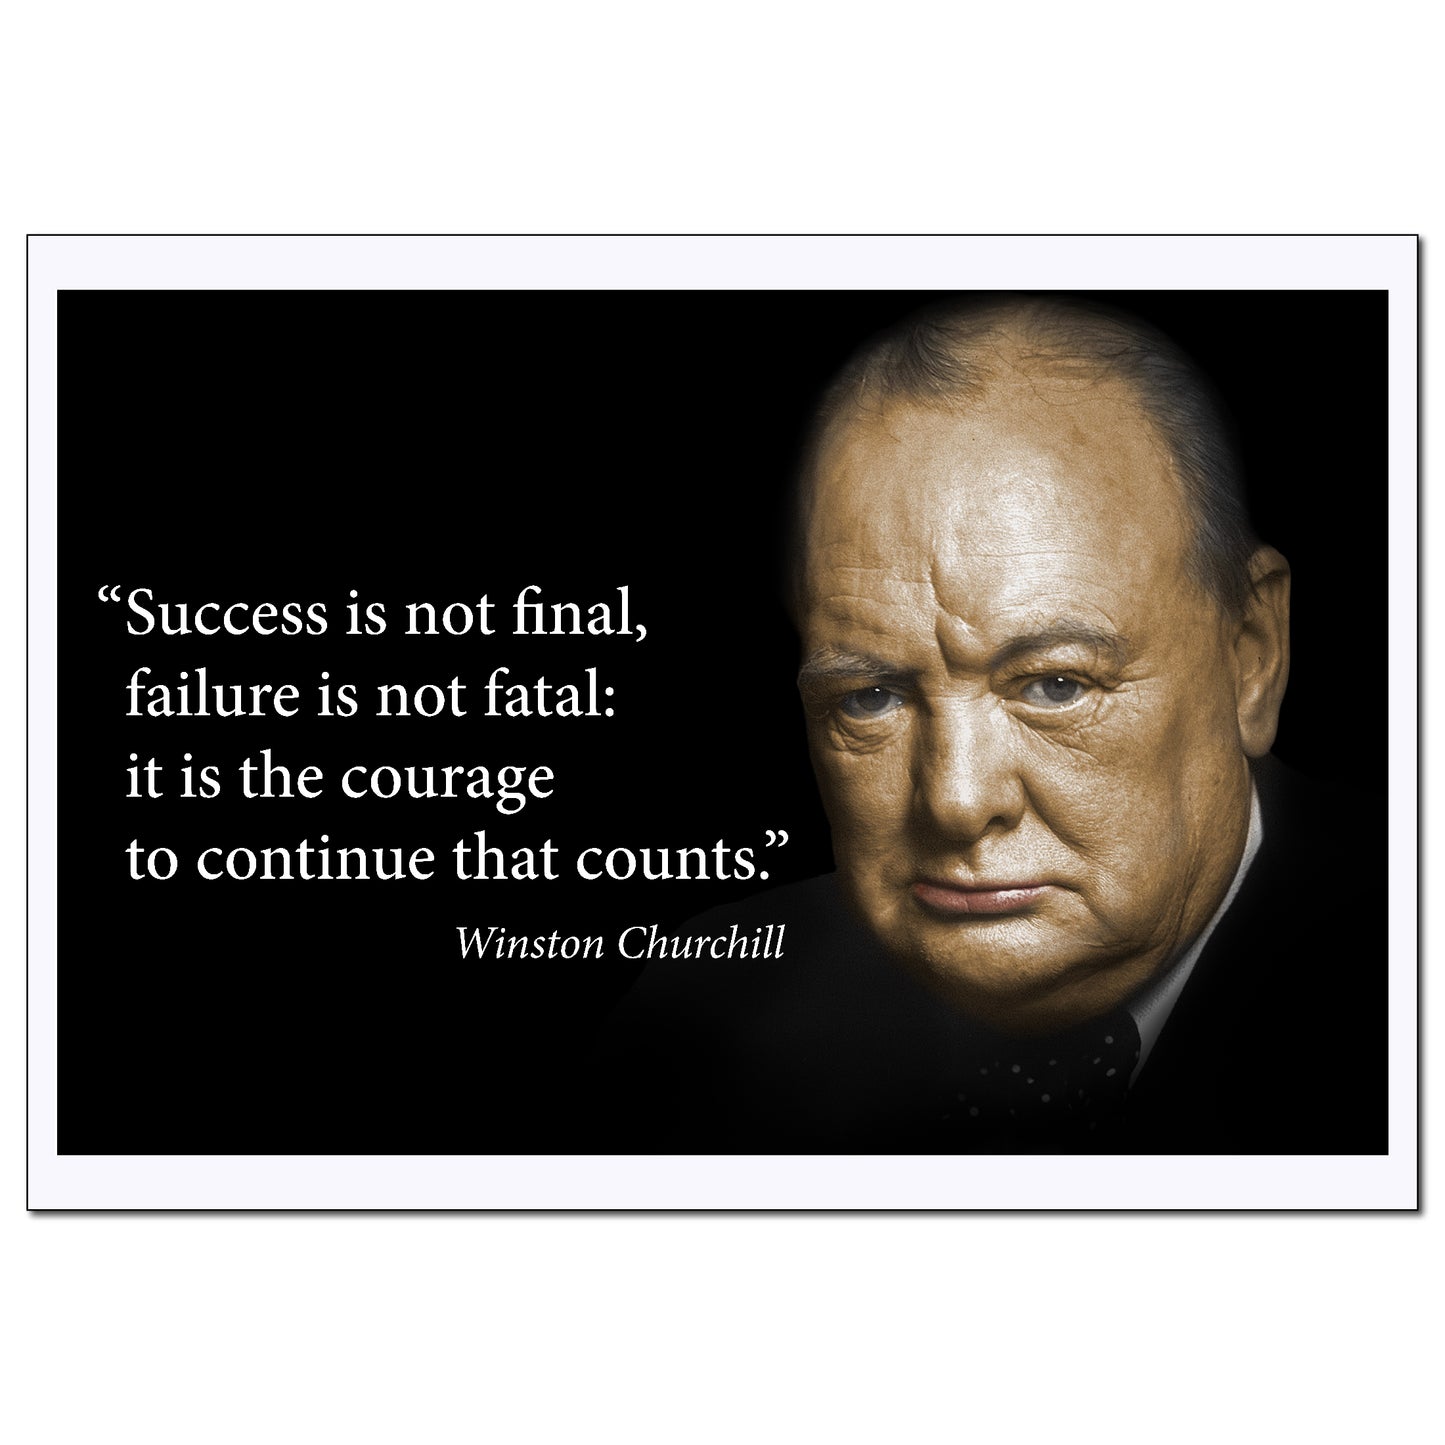 Winston Churchill quote success is not final, failure is not fatal: it is the courage to continue that counts